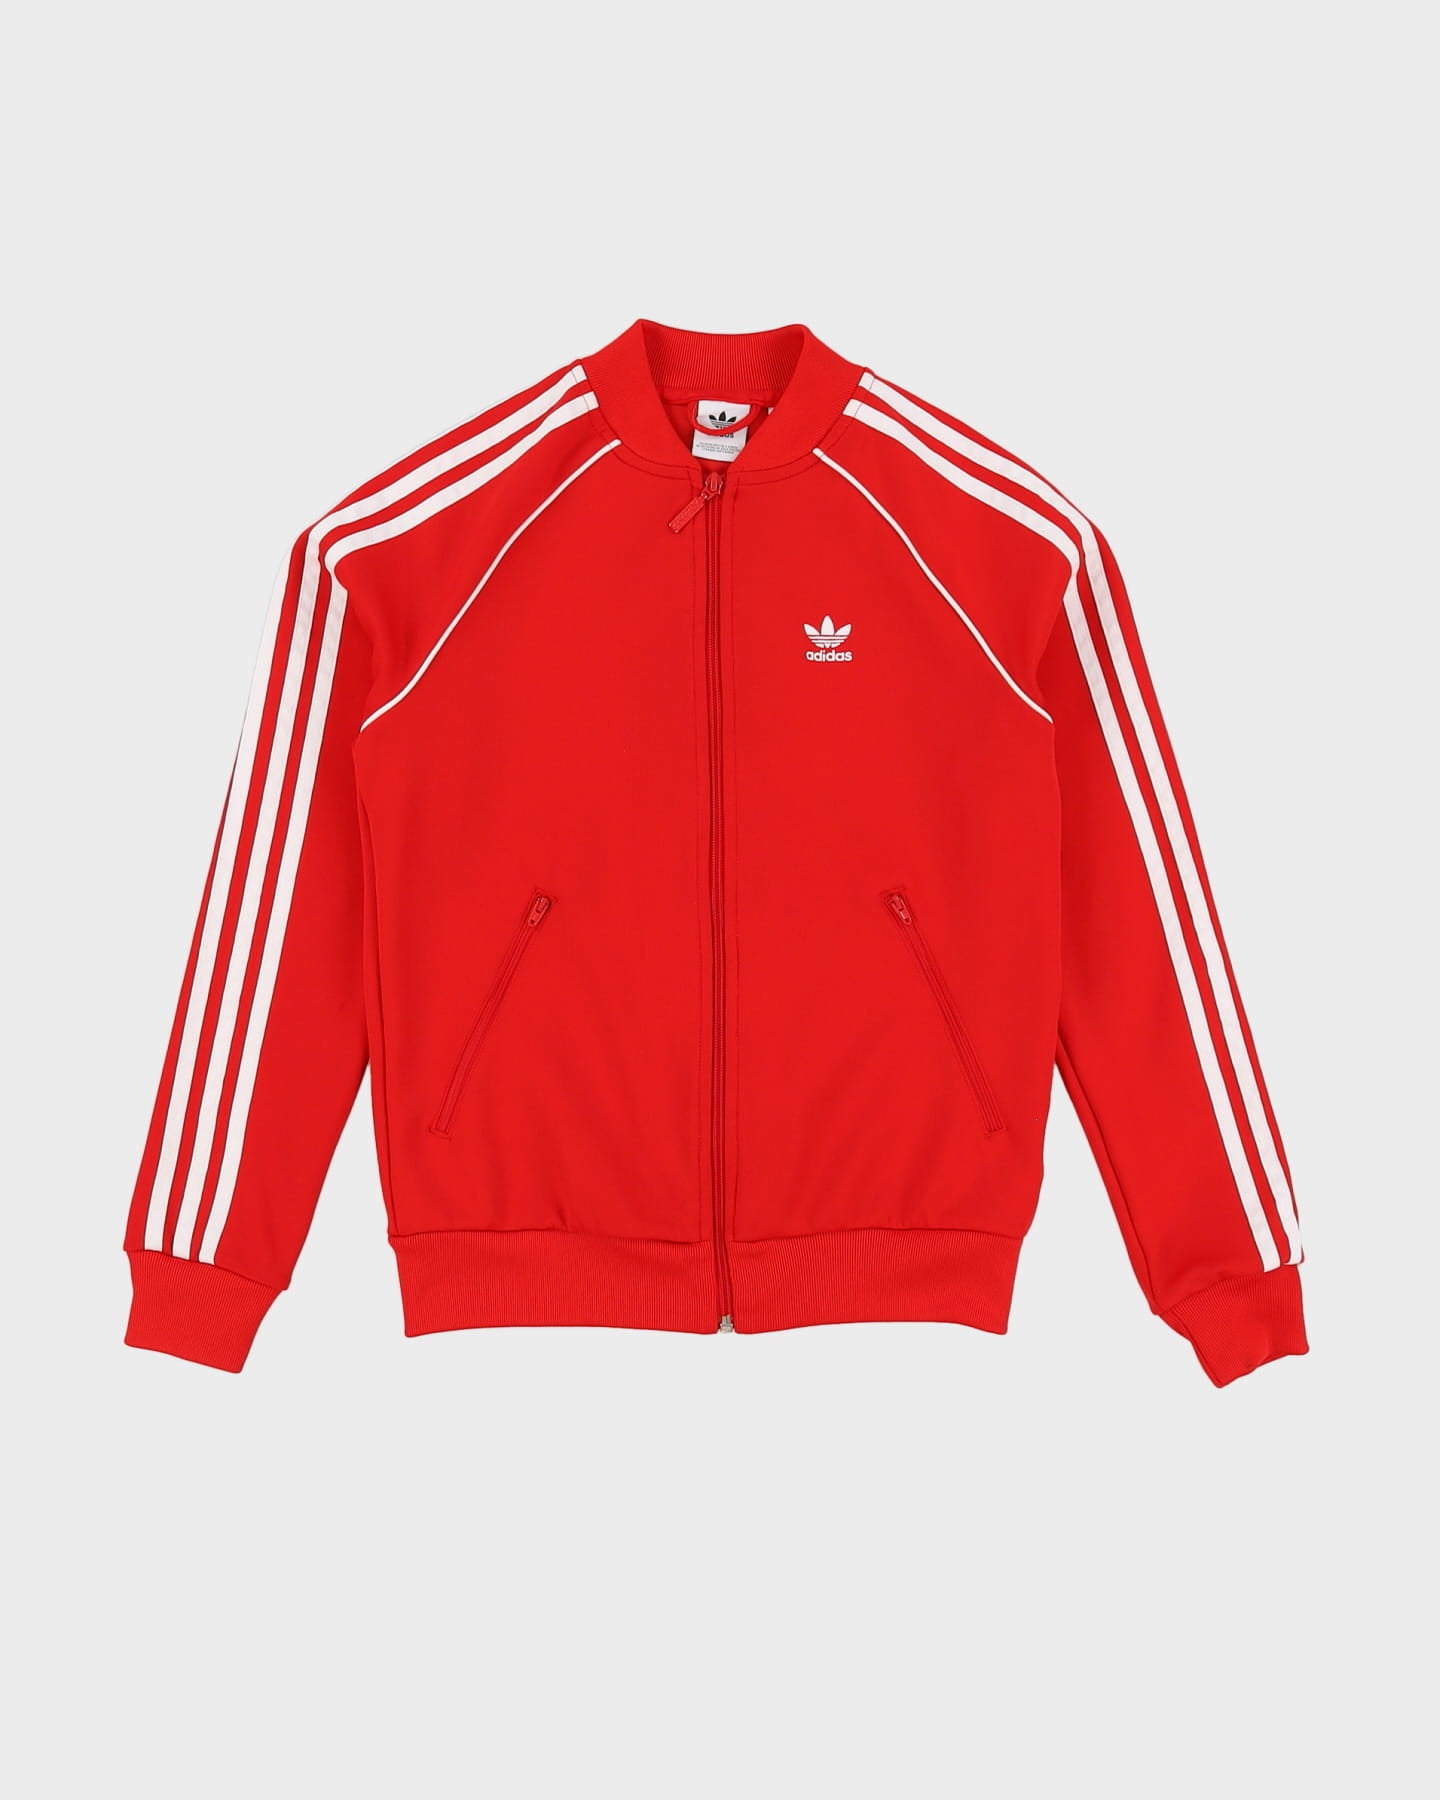 Adidas Red Track Jacket - XS